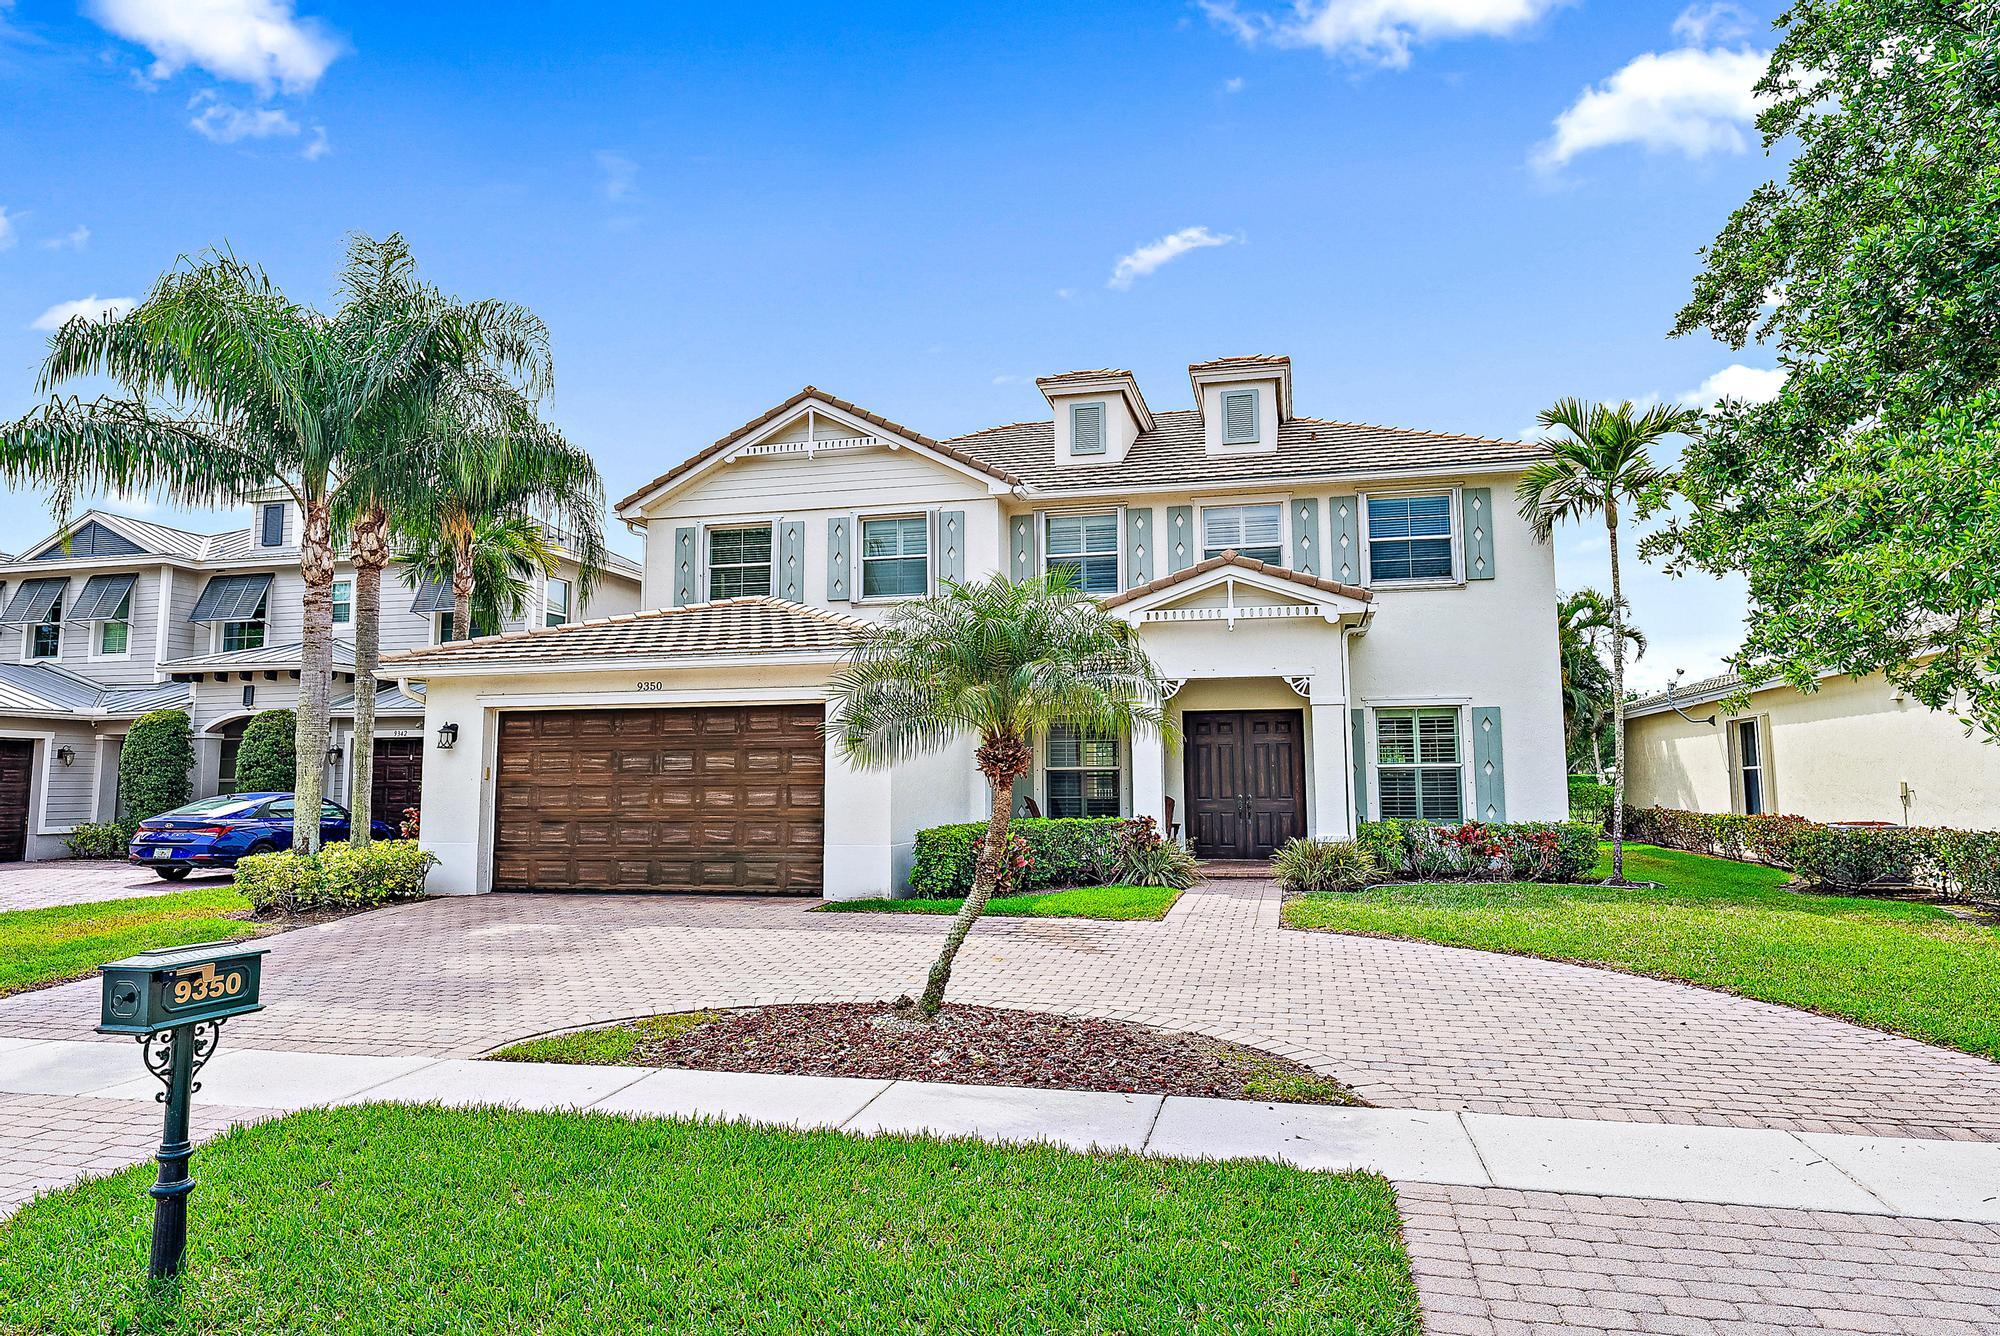 9350 Madewood Court, West Palm Beach, Palm Beach County, Florida - 5 Bedrooms  
3 Bathrooms - 